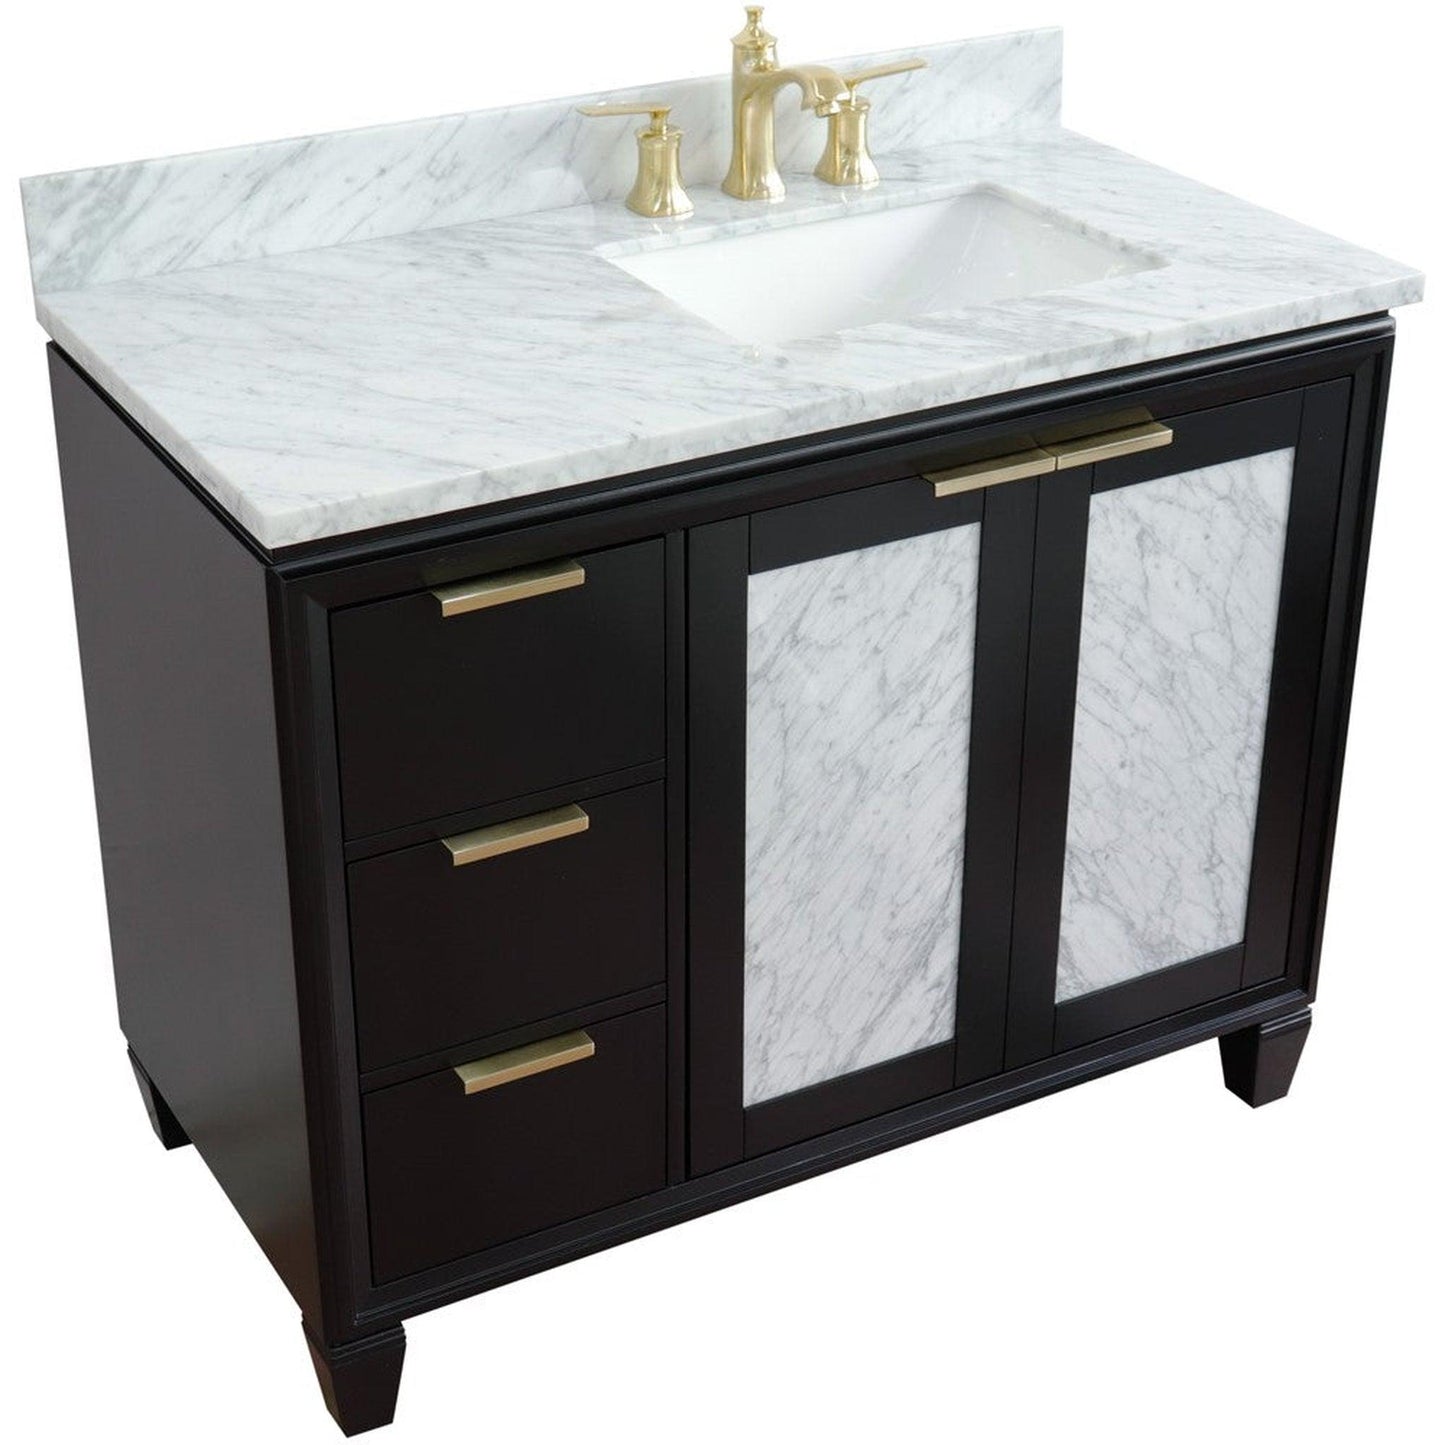 Bellaterra Home Trento 43" 2-Door 3-Drawer Black Freestanding Vanity Set With Ceramic Right Undermount Rectangular Sink and White Carrara Marble Top, and Right Door Cabinet